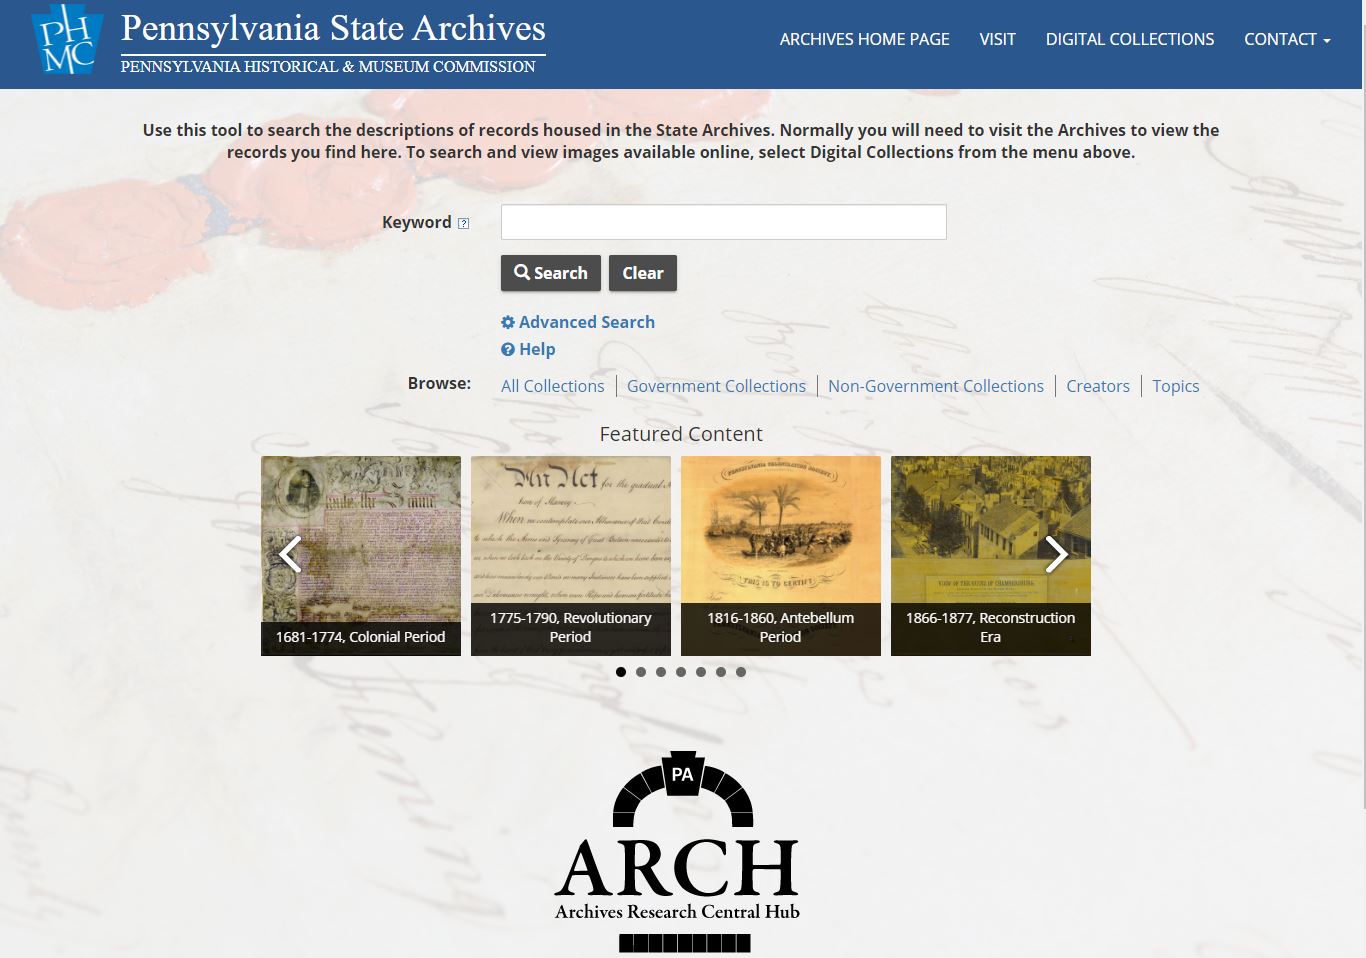 ARCH Home Page.jpg